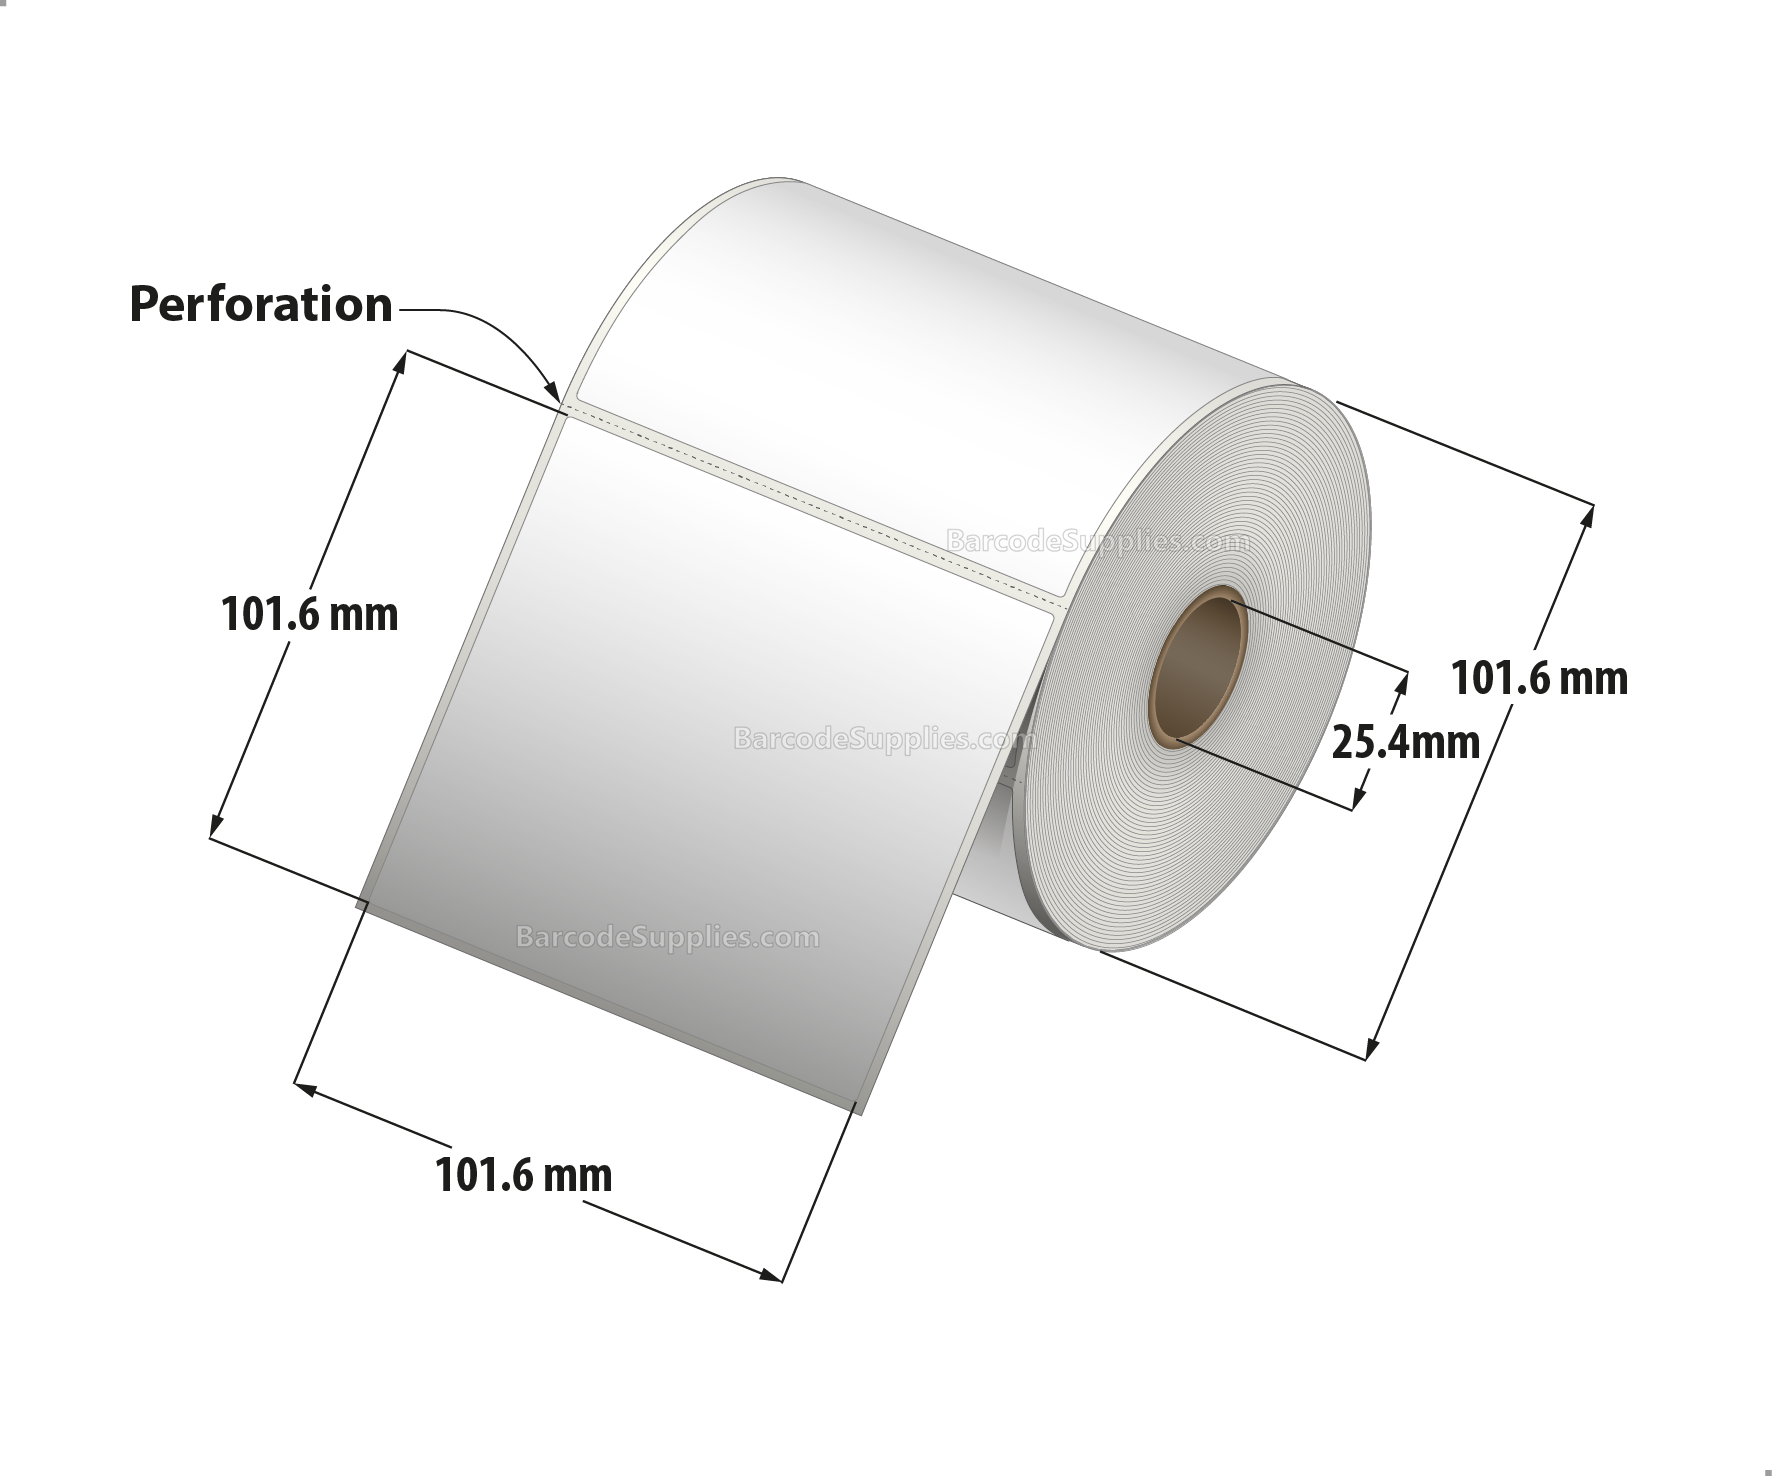 4 x 4 Direct Thermal White Labels With Rubber Adhesive - Perforated - 377 Labels Per Roll - Carton Of 12 Rolls - 4524 Labels Total - MPN: RDT4-400400-1P